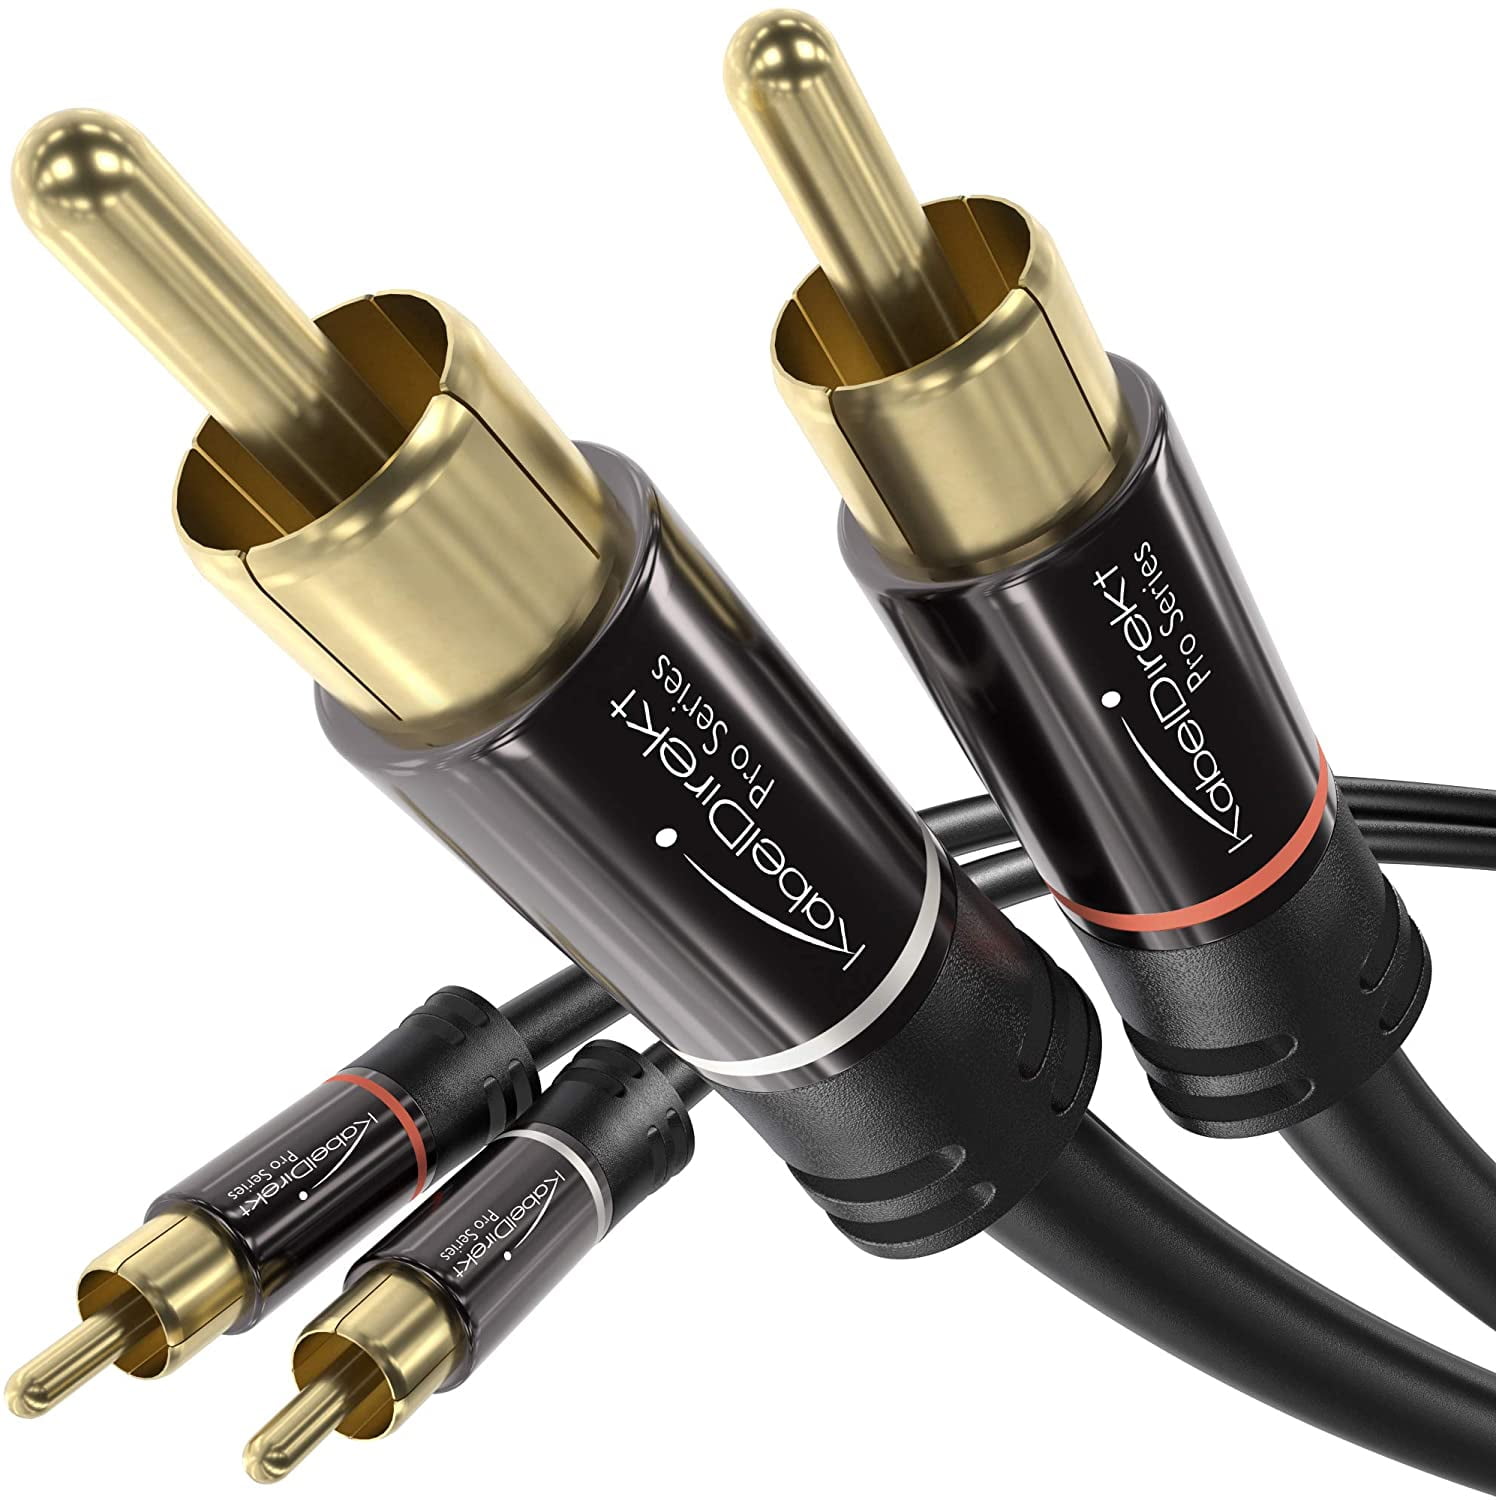 Digital Coaxial Audio Video Cable Stereo SPDIF RCA to 3.5mm Jack Male for  HDTV - 3FT